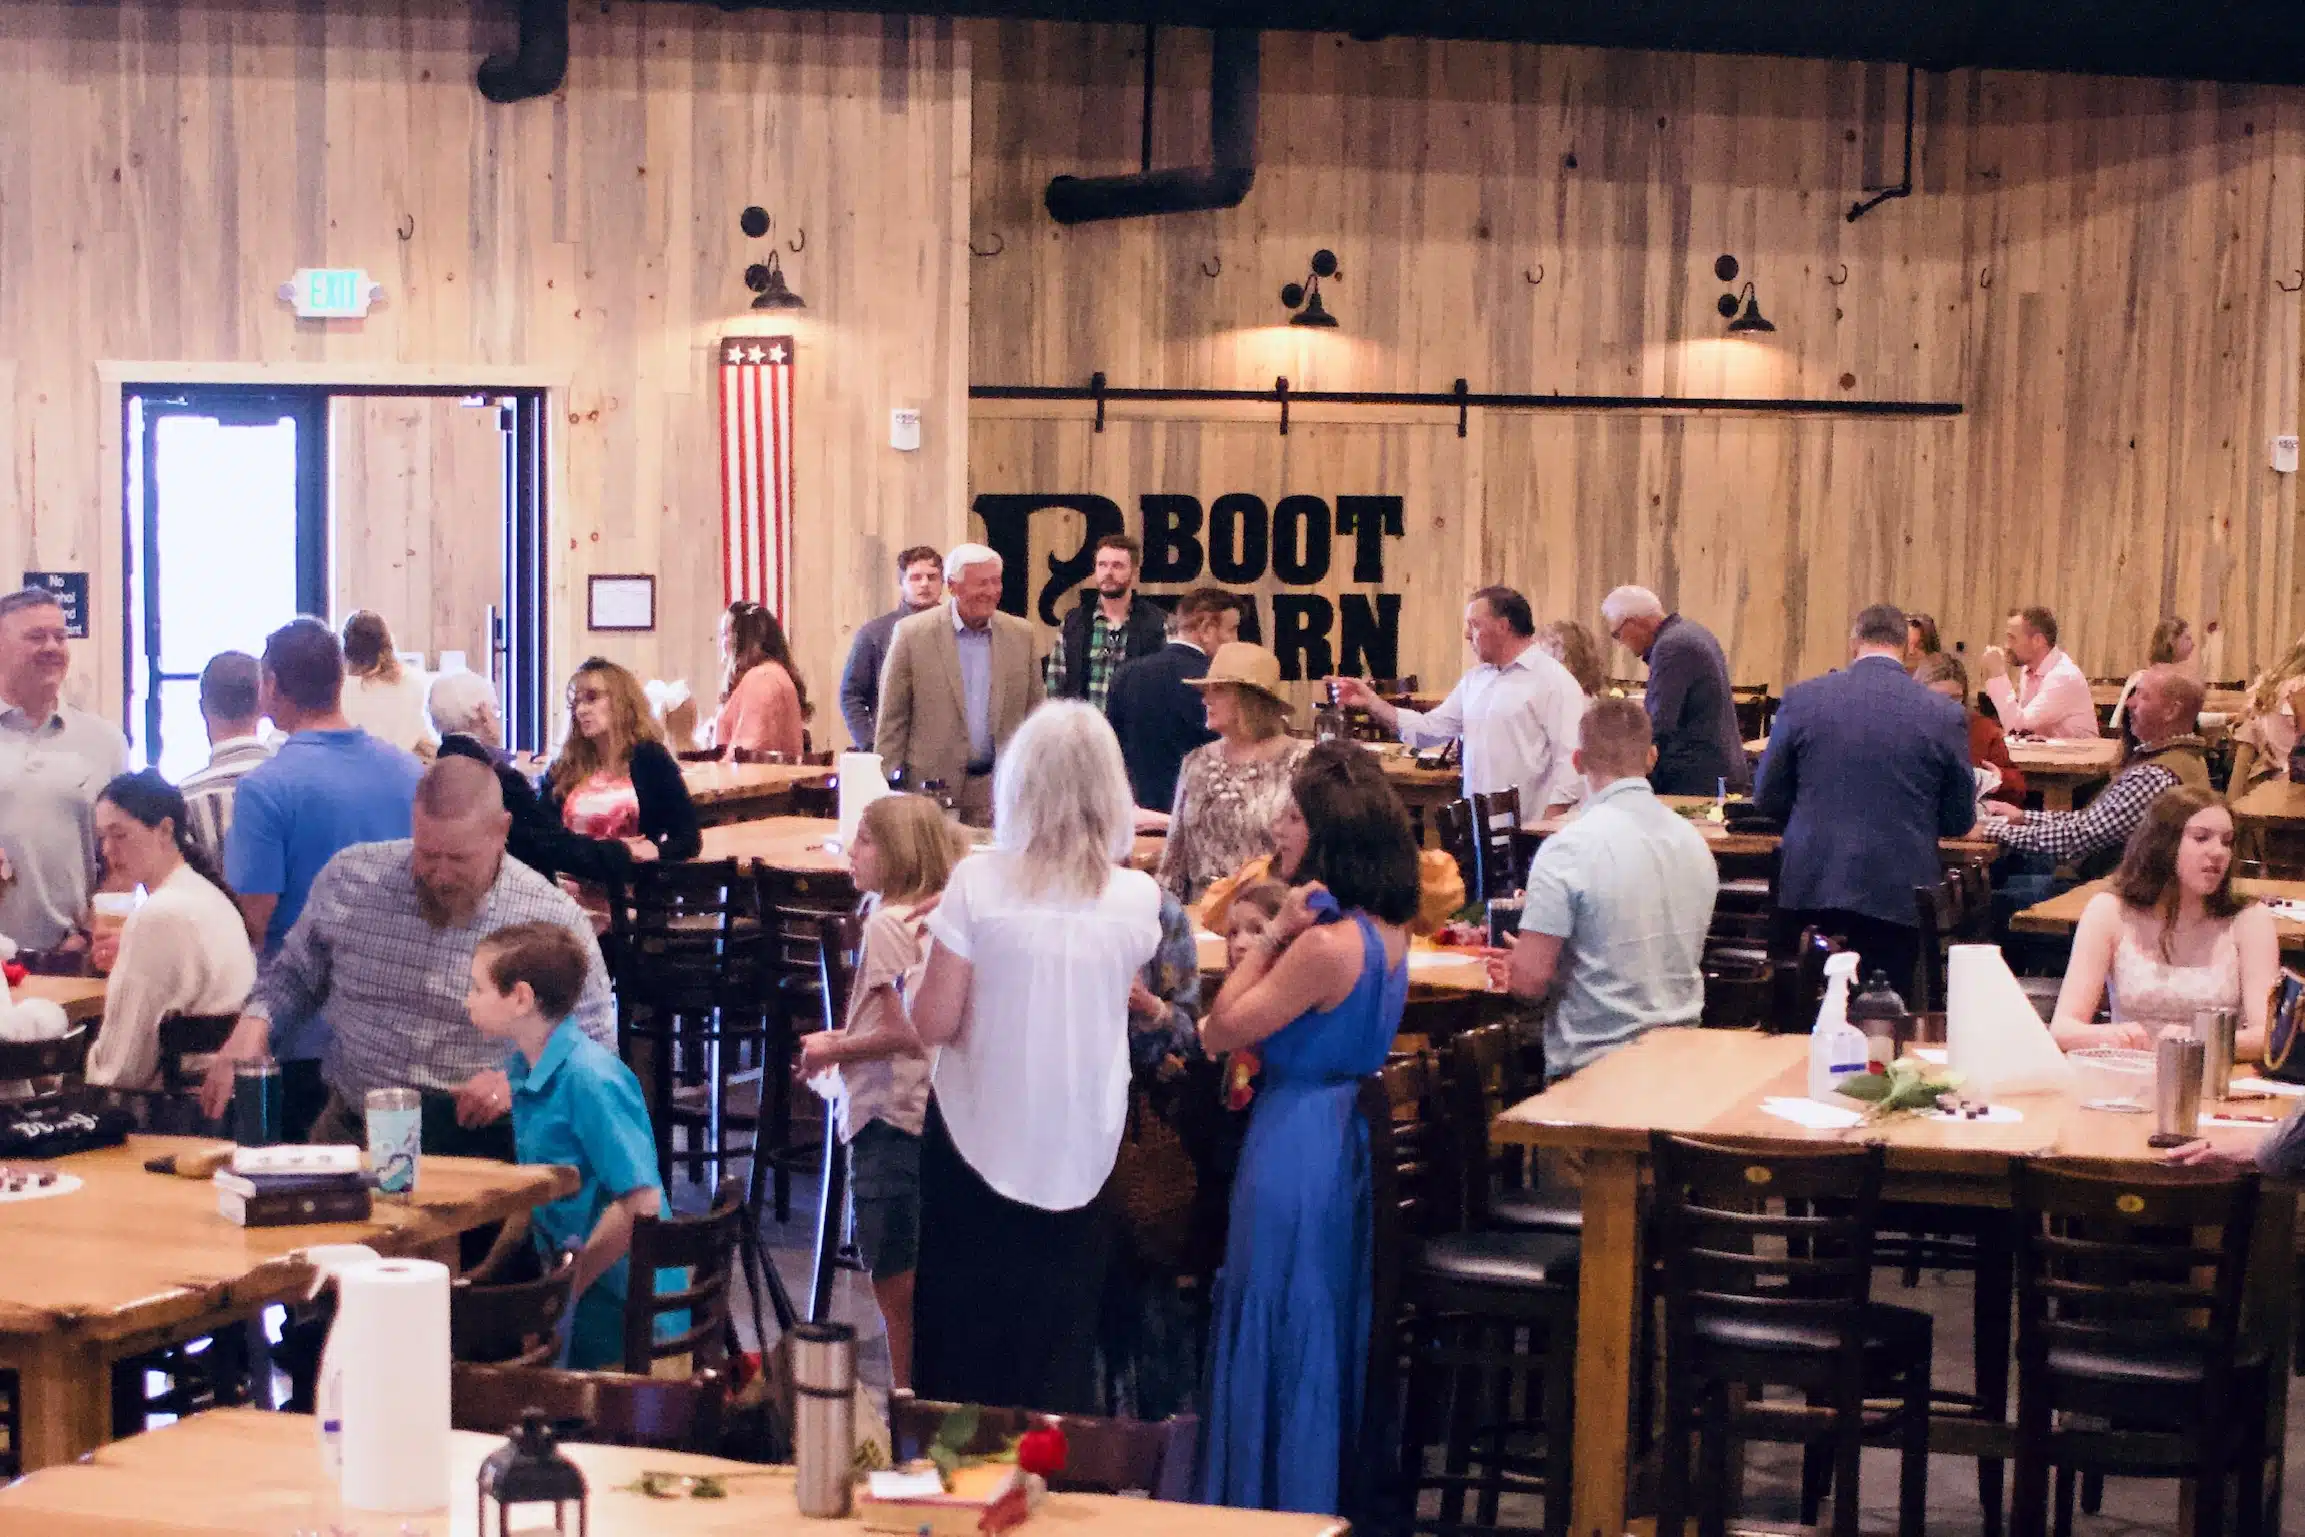 Sunday Service at the Boot Barn Hall